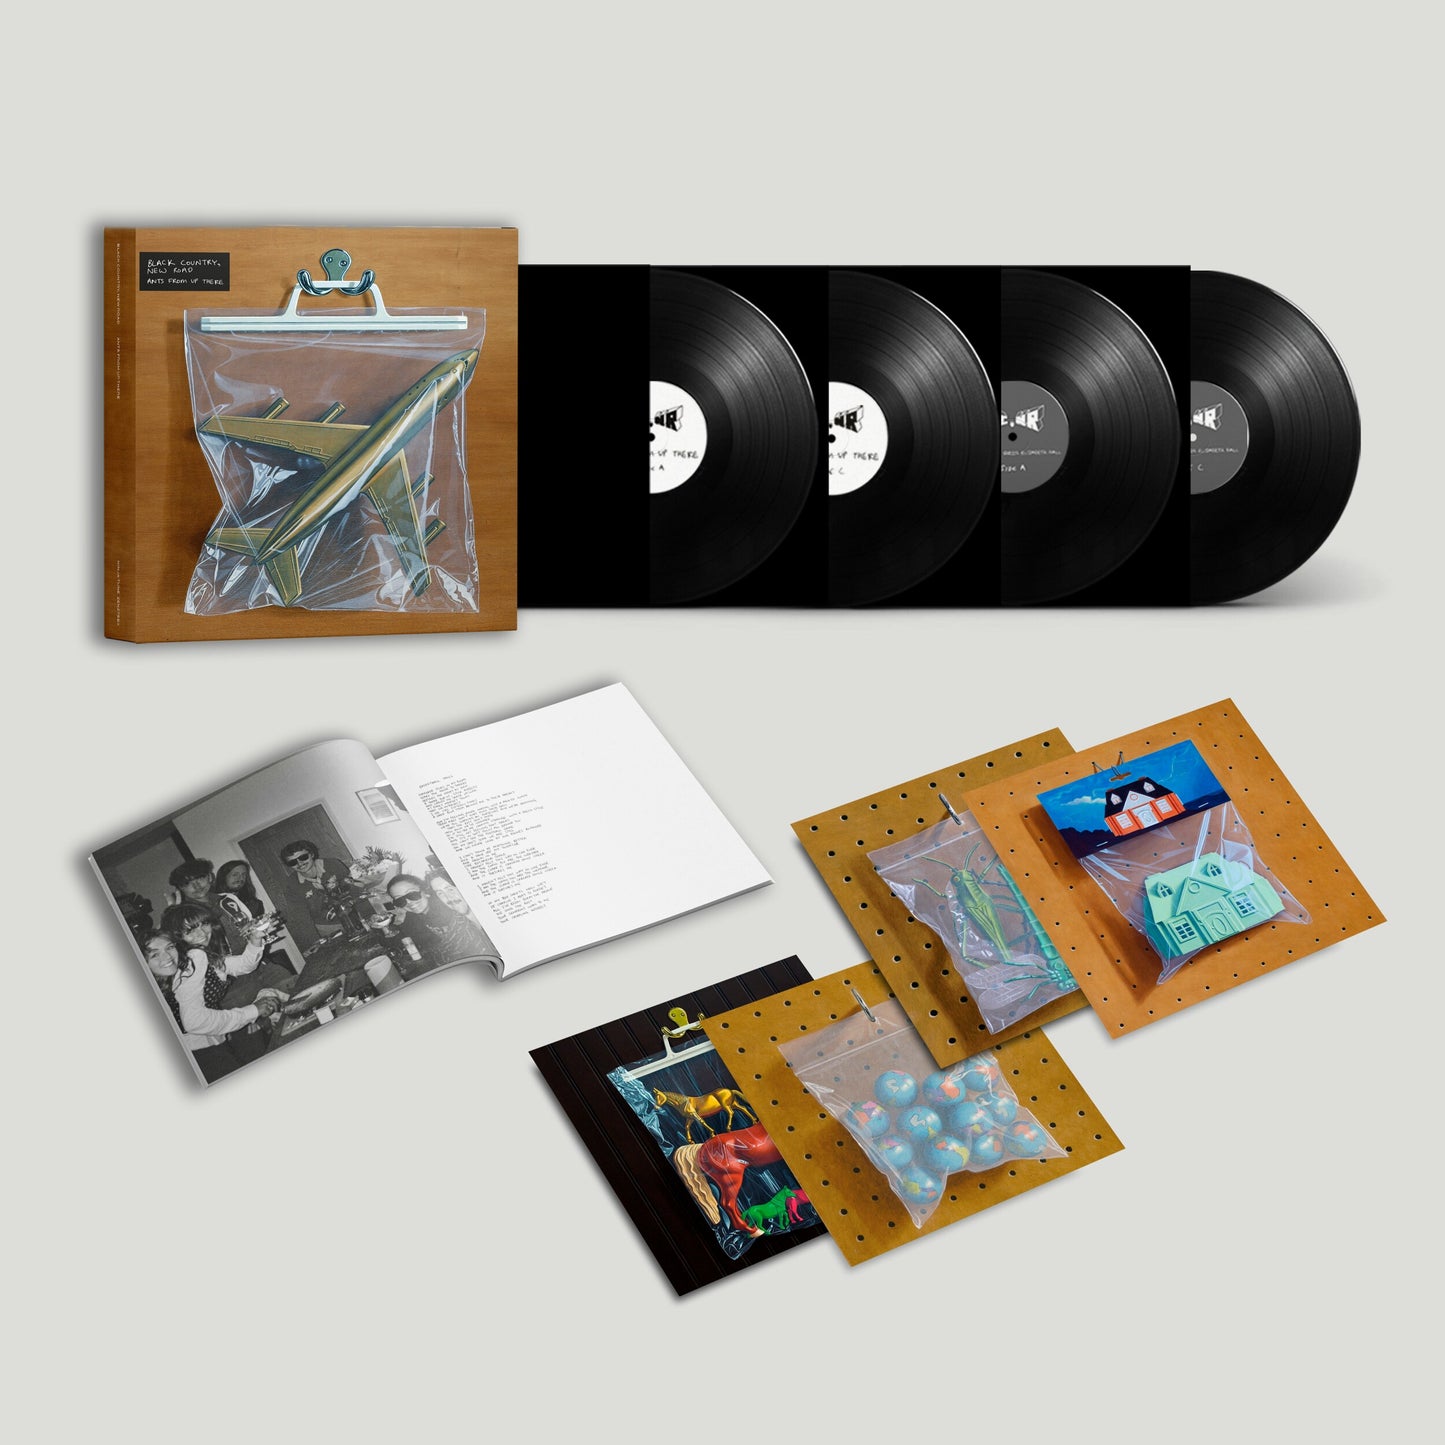 Black Country, New Road - Ants From Up There (LTD Deluxe Box Set) - 4LP